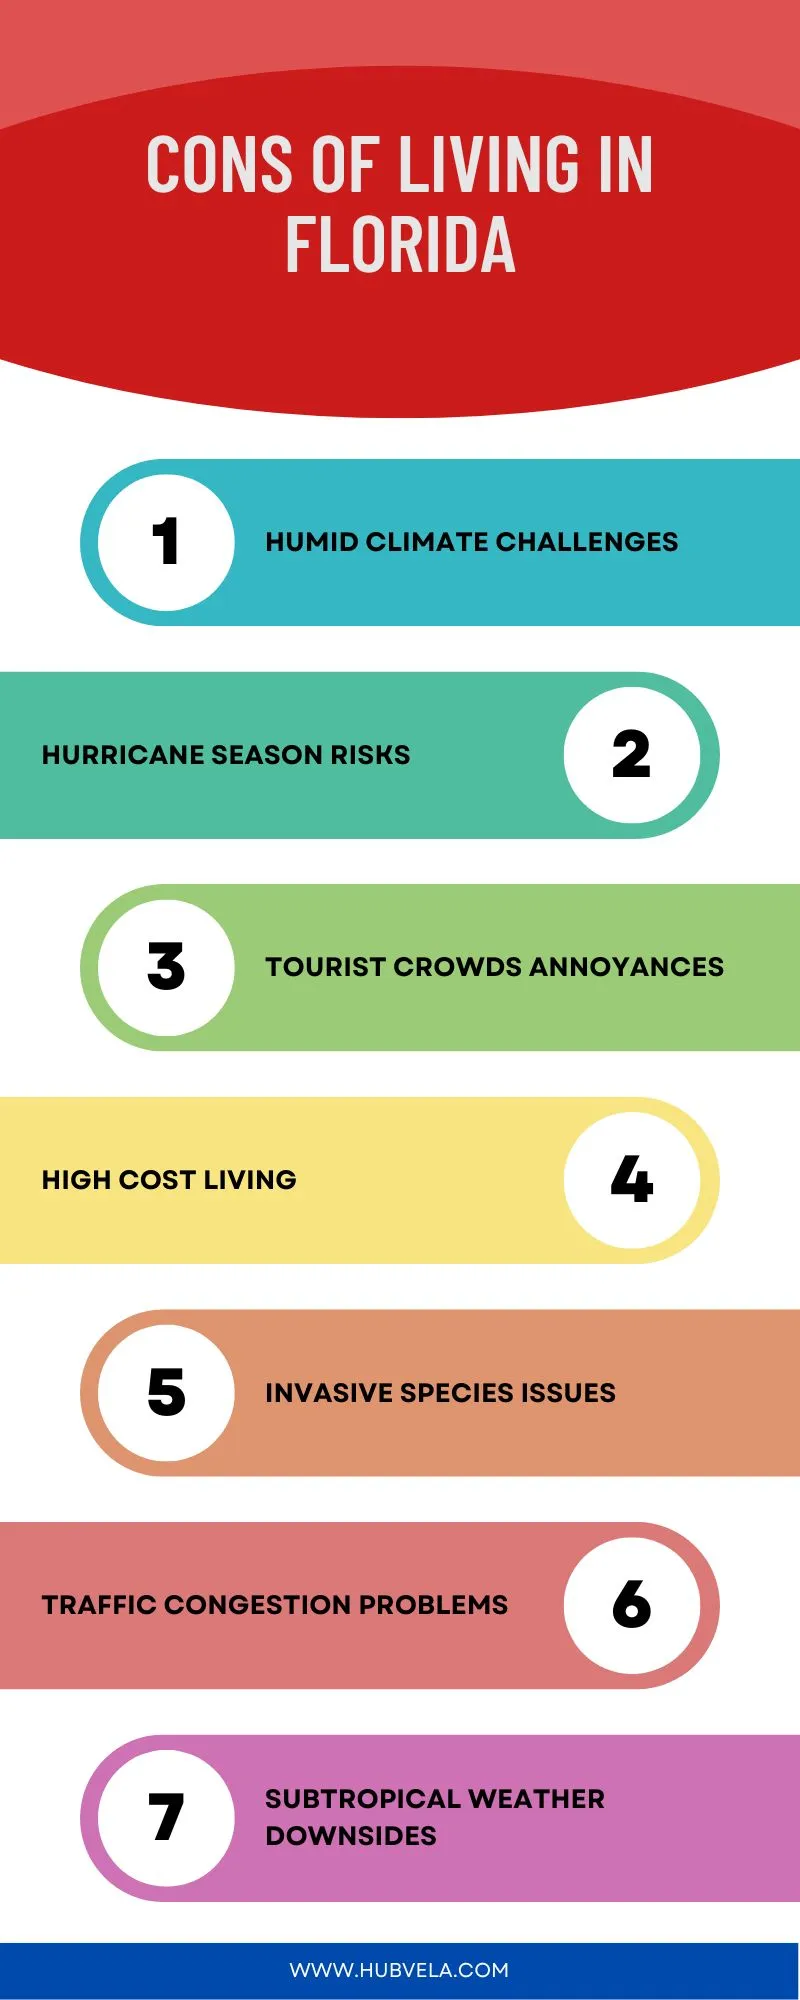 Cons of Living in Florida Infographic